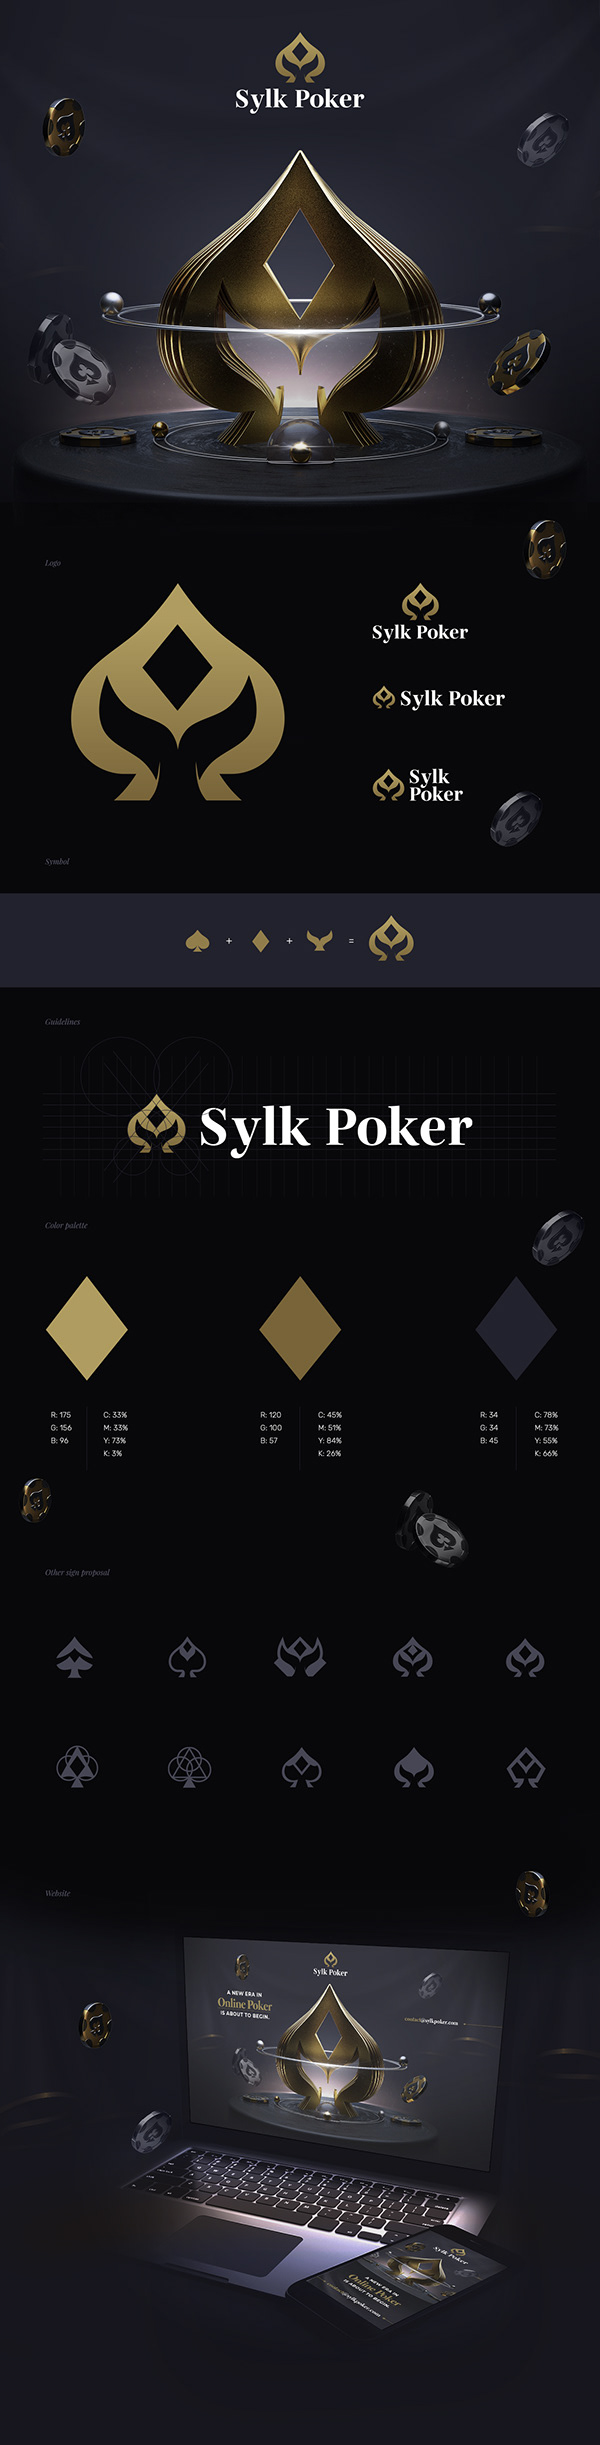 Poker Brand and Landing Page